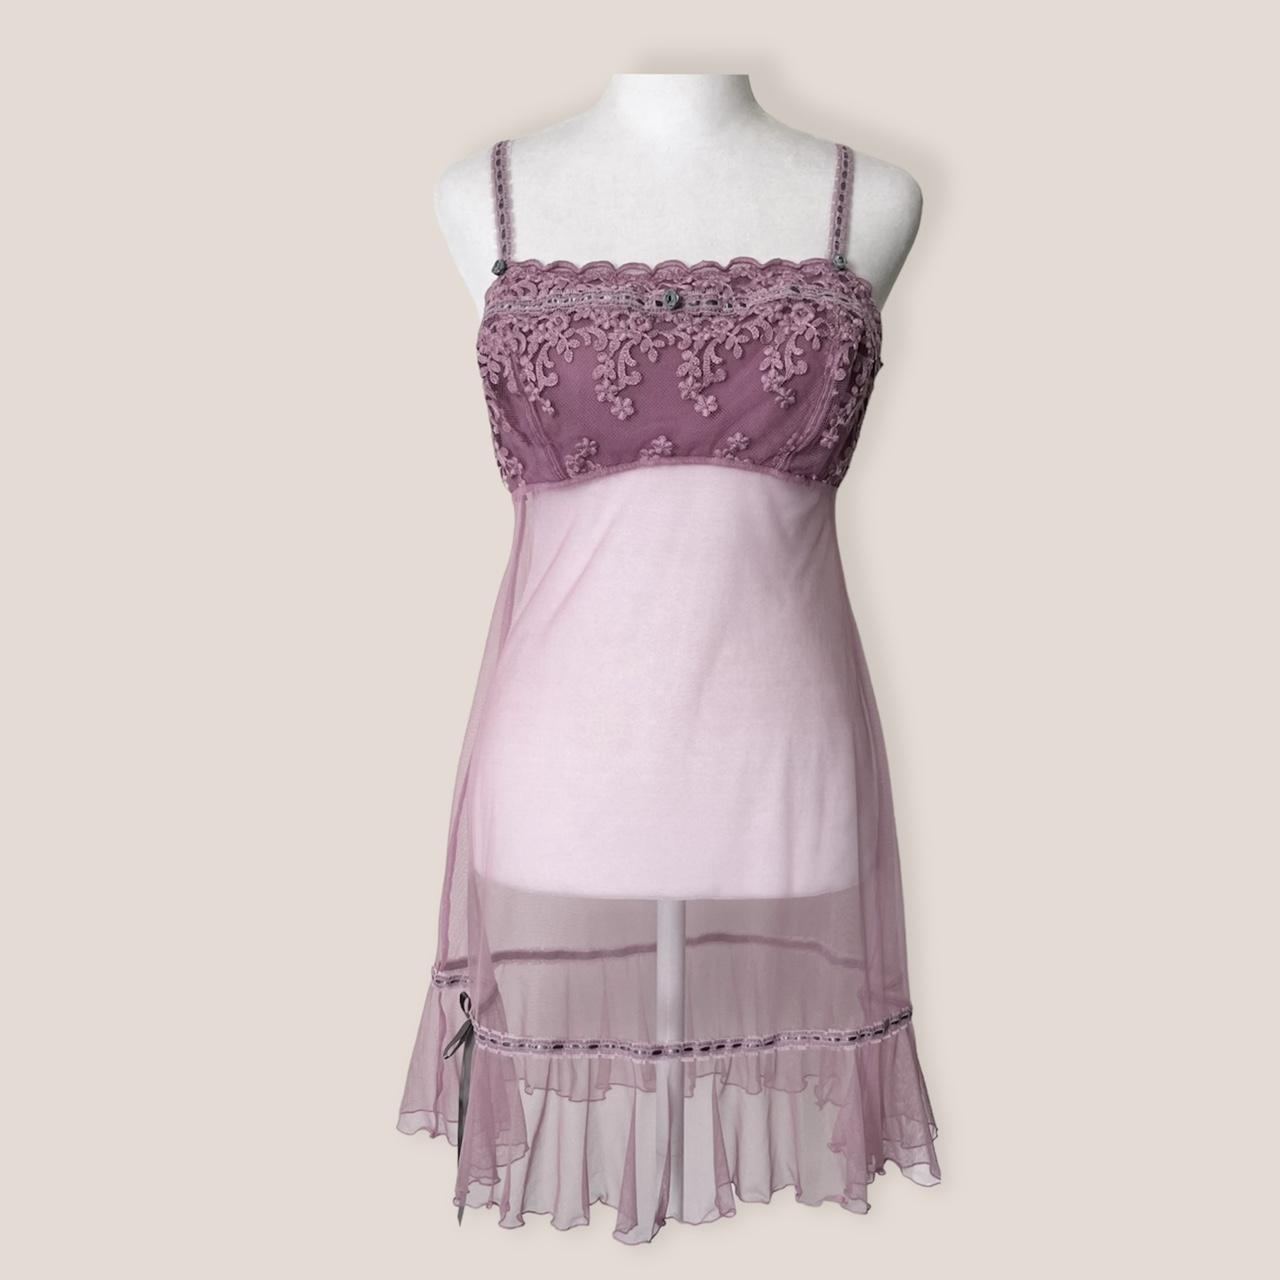 Product Image 1 - ✿Lilac sheer lace chemise✿
The prettiest